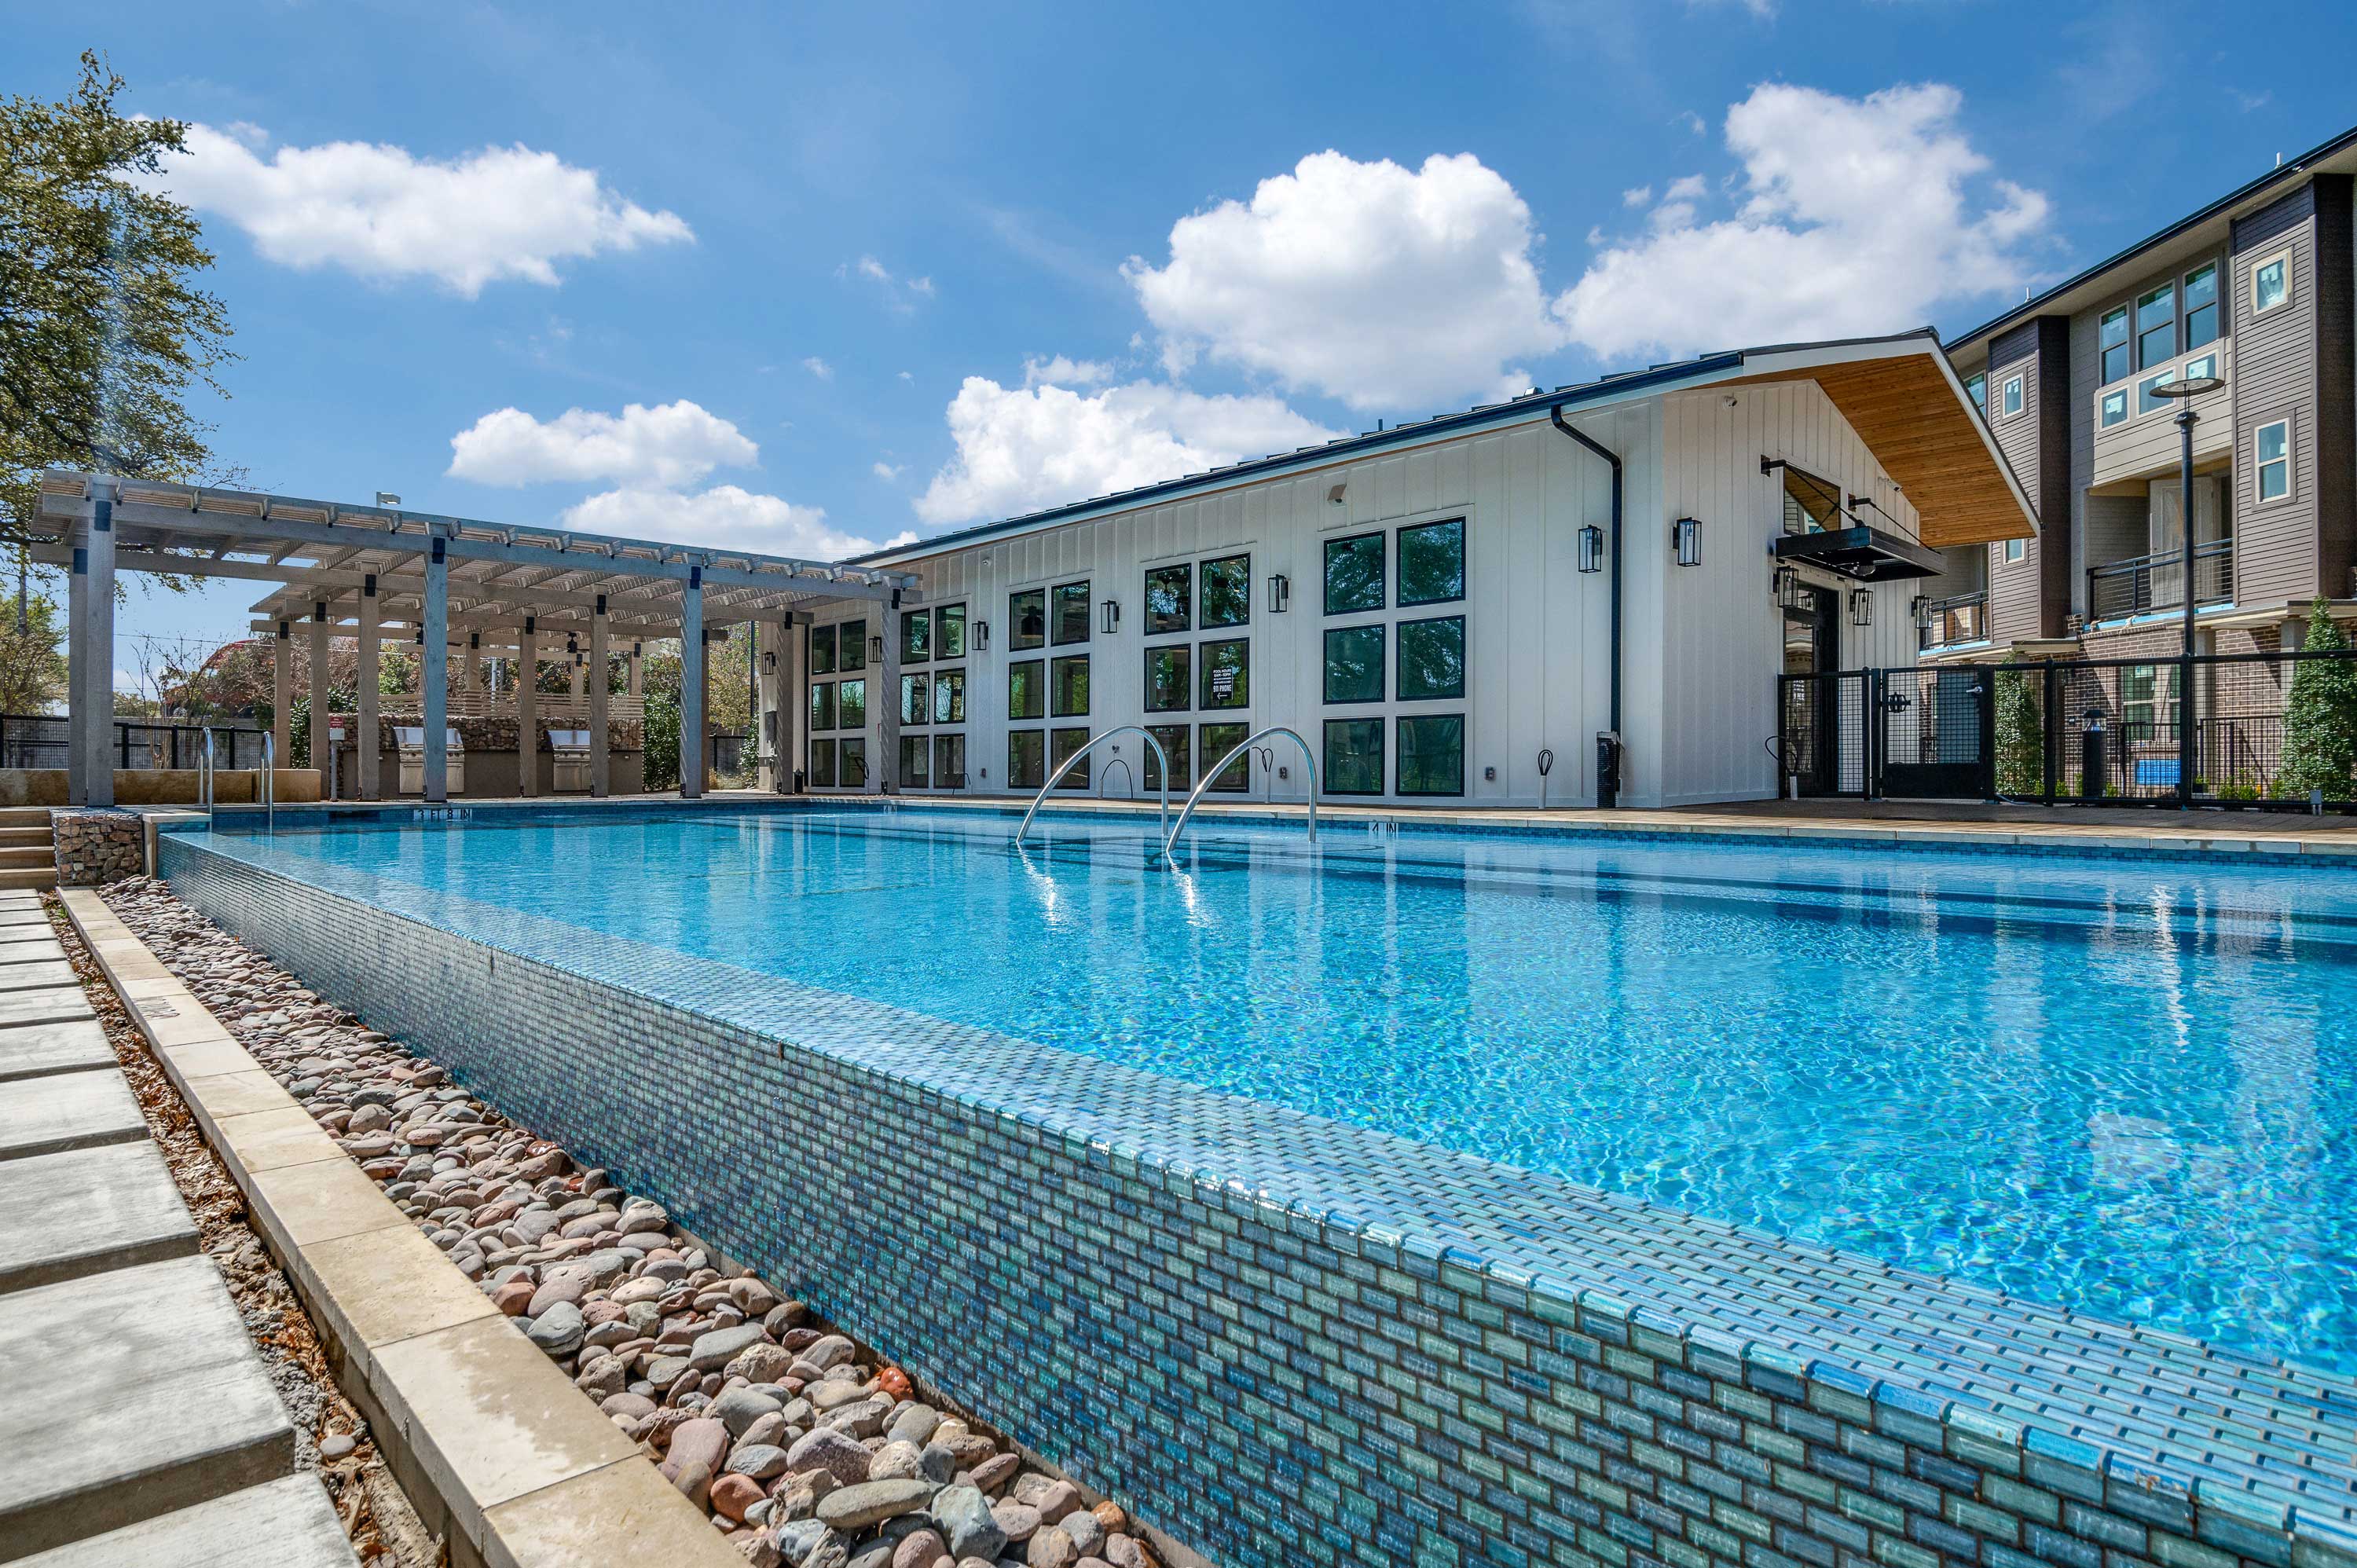 Take a Dip in our Infinity Edge Pool at Midway Row House in Addison, Texas.